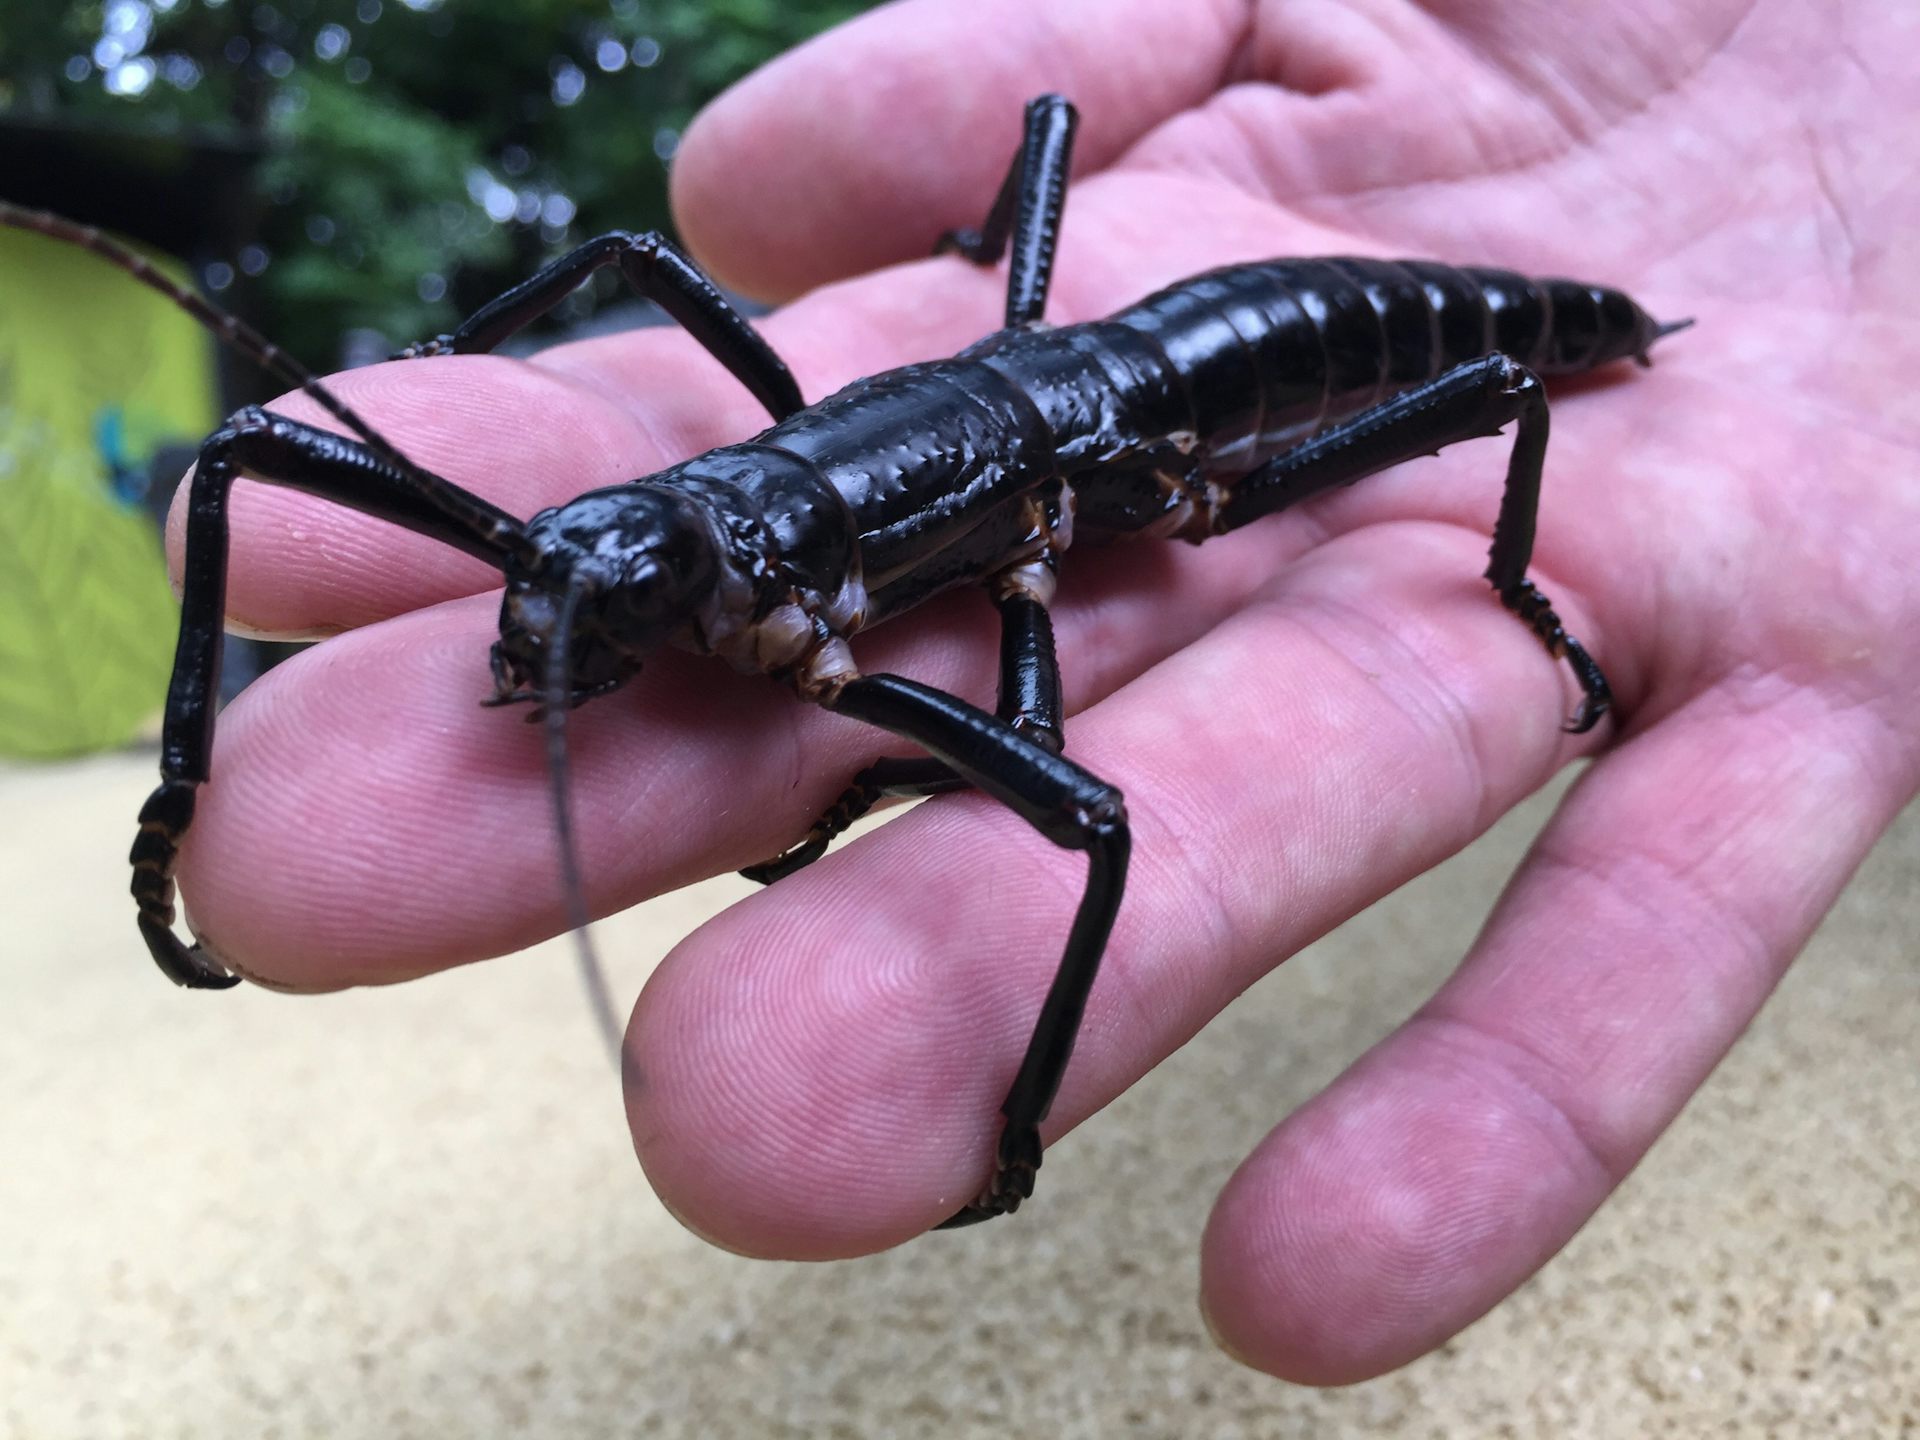  Lord Howe Island stick insect on a human hand